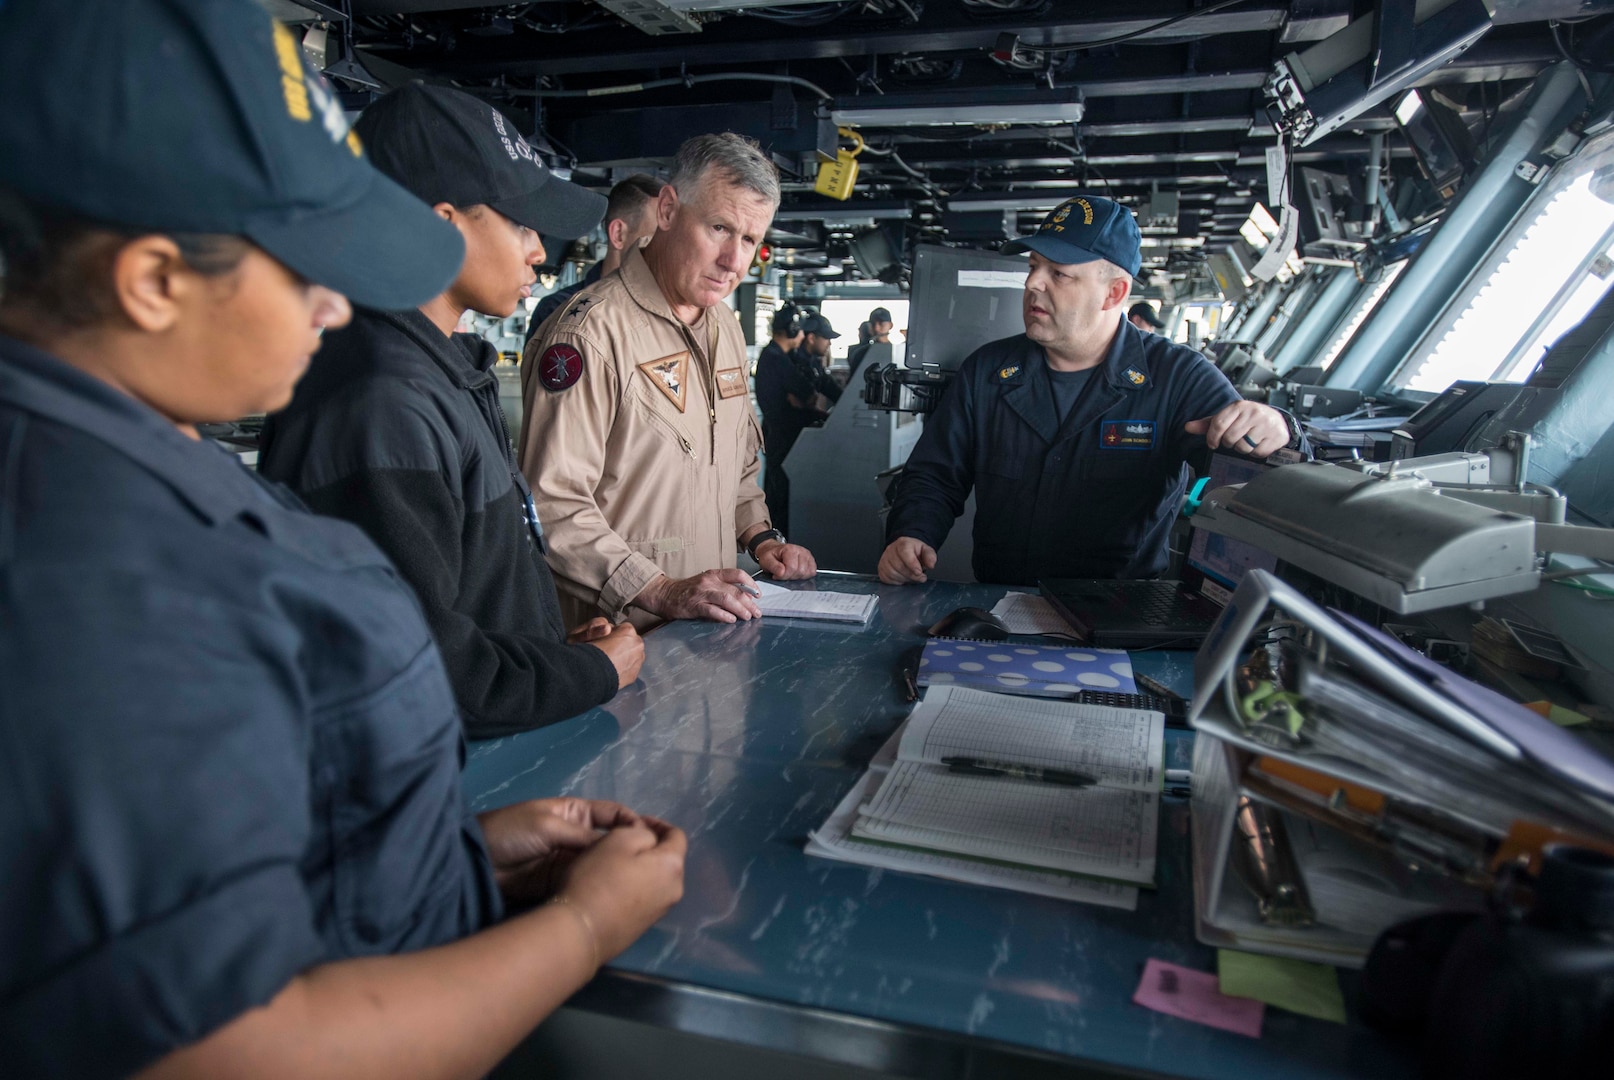 ARABIAN GULF (May 21, 2017) Rear Adm. Bruce Lindsey, commander of Naval Air Force Atlantic, meets with Sailors aboard the aircraft carrier USS George H.W. Bush (CVN 77). The ship is deployed in the U.S. 5th Fleet area of operations in support of maritime security operations designed to reassure allies and partners, and preserve the freedom of navigation and the free flow of commerce in the region. (U.S. Navy photo by Mass Communication Specialist 3rd Class Christopher Gaines/Released)